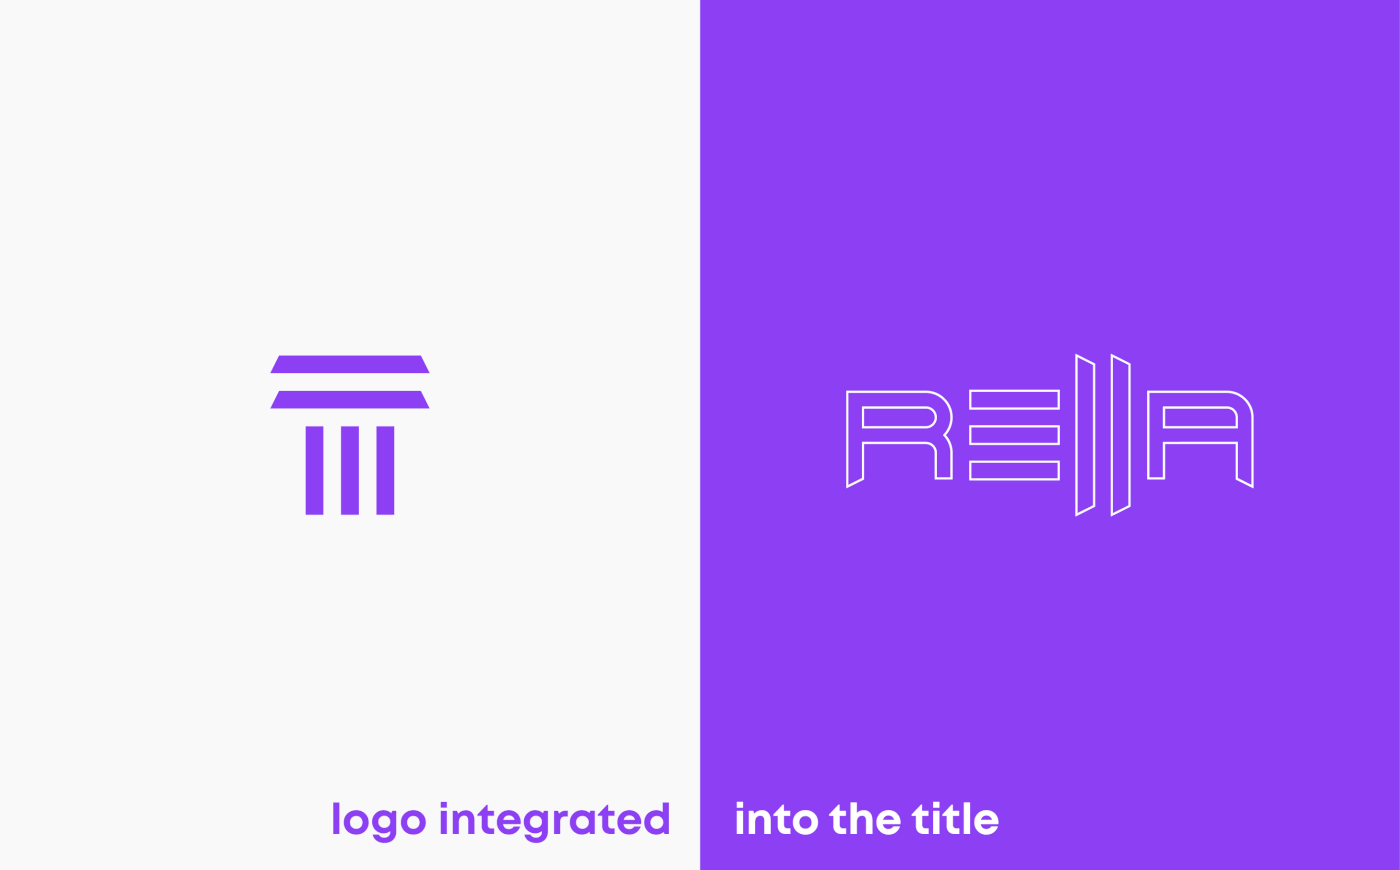 Animation. The idea of integrating a logo into brand naming.